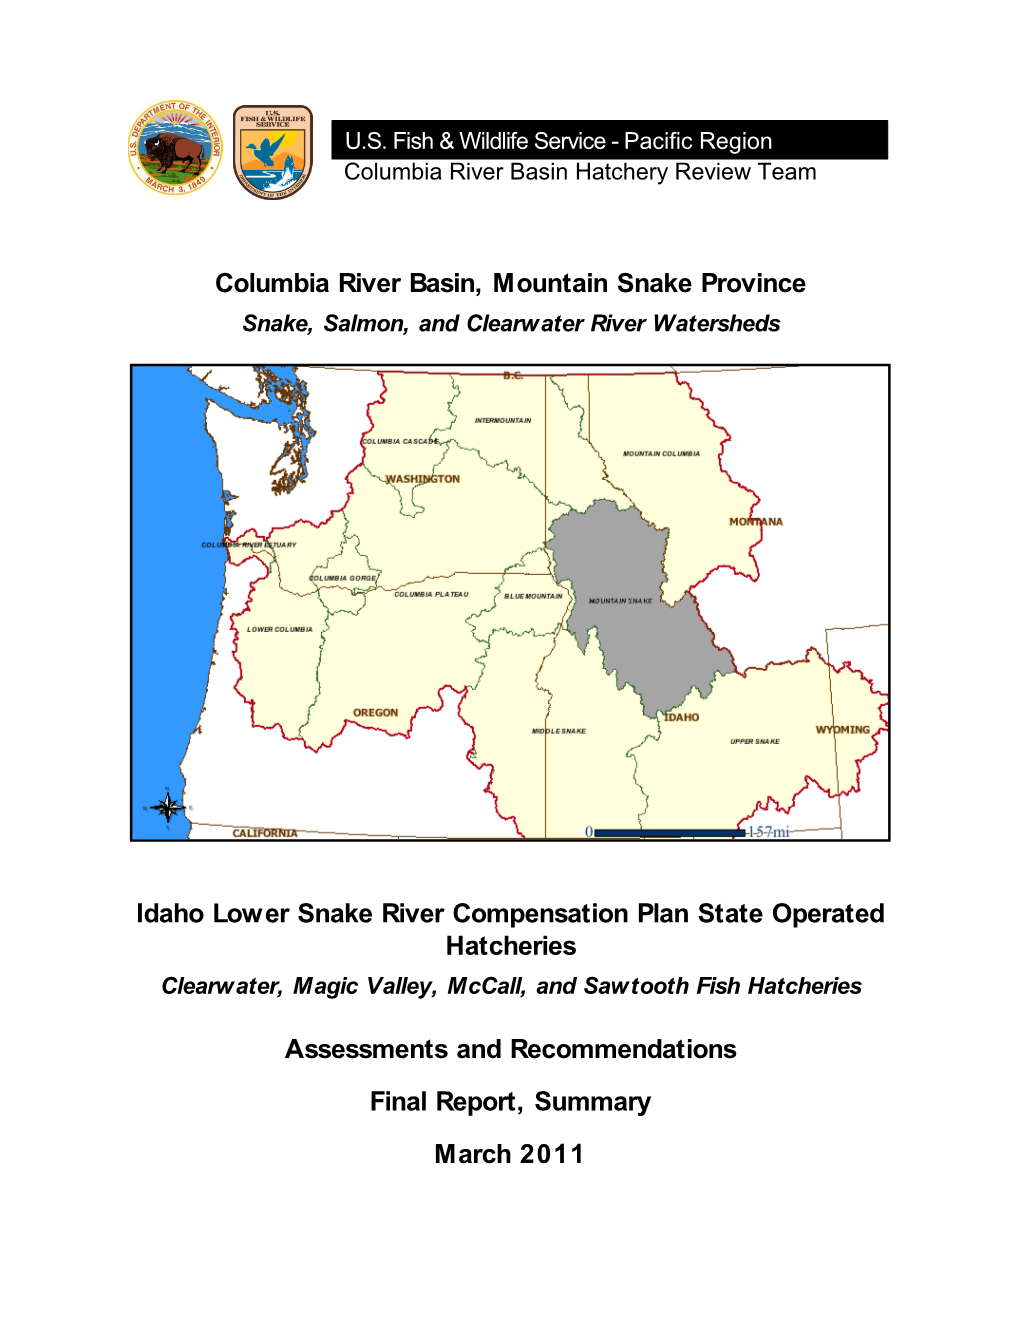 Idaho LSRCP Hatcheries Assessments and Recommendations Report – March 2011